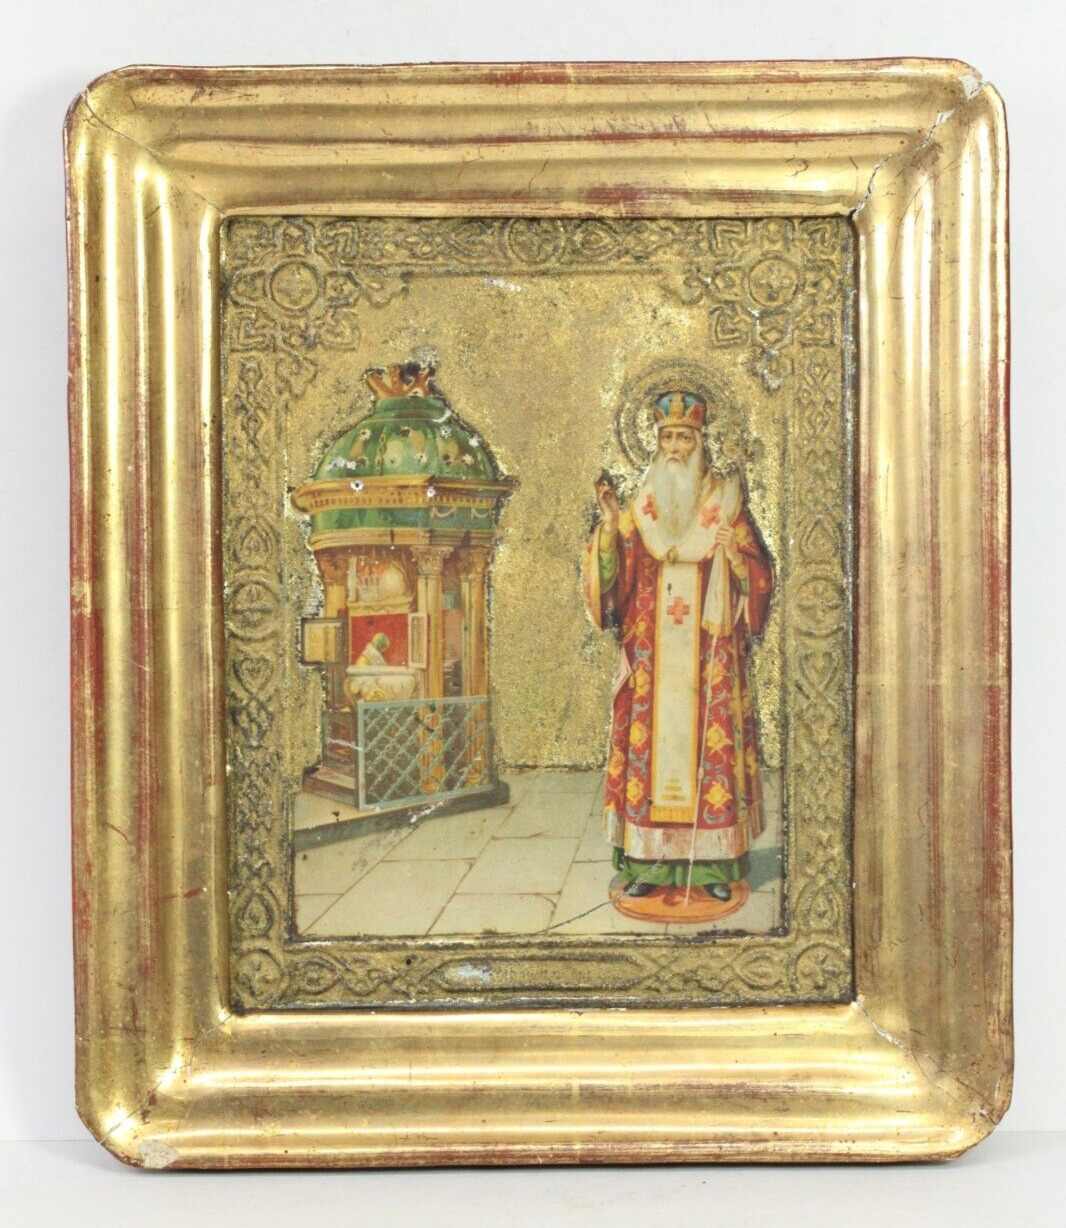 Antique 19c Russian Orthodox tin Lithograph Icon of Saint Athanasius the Great